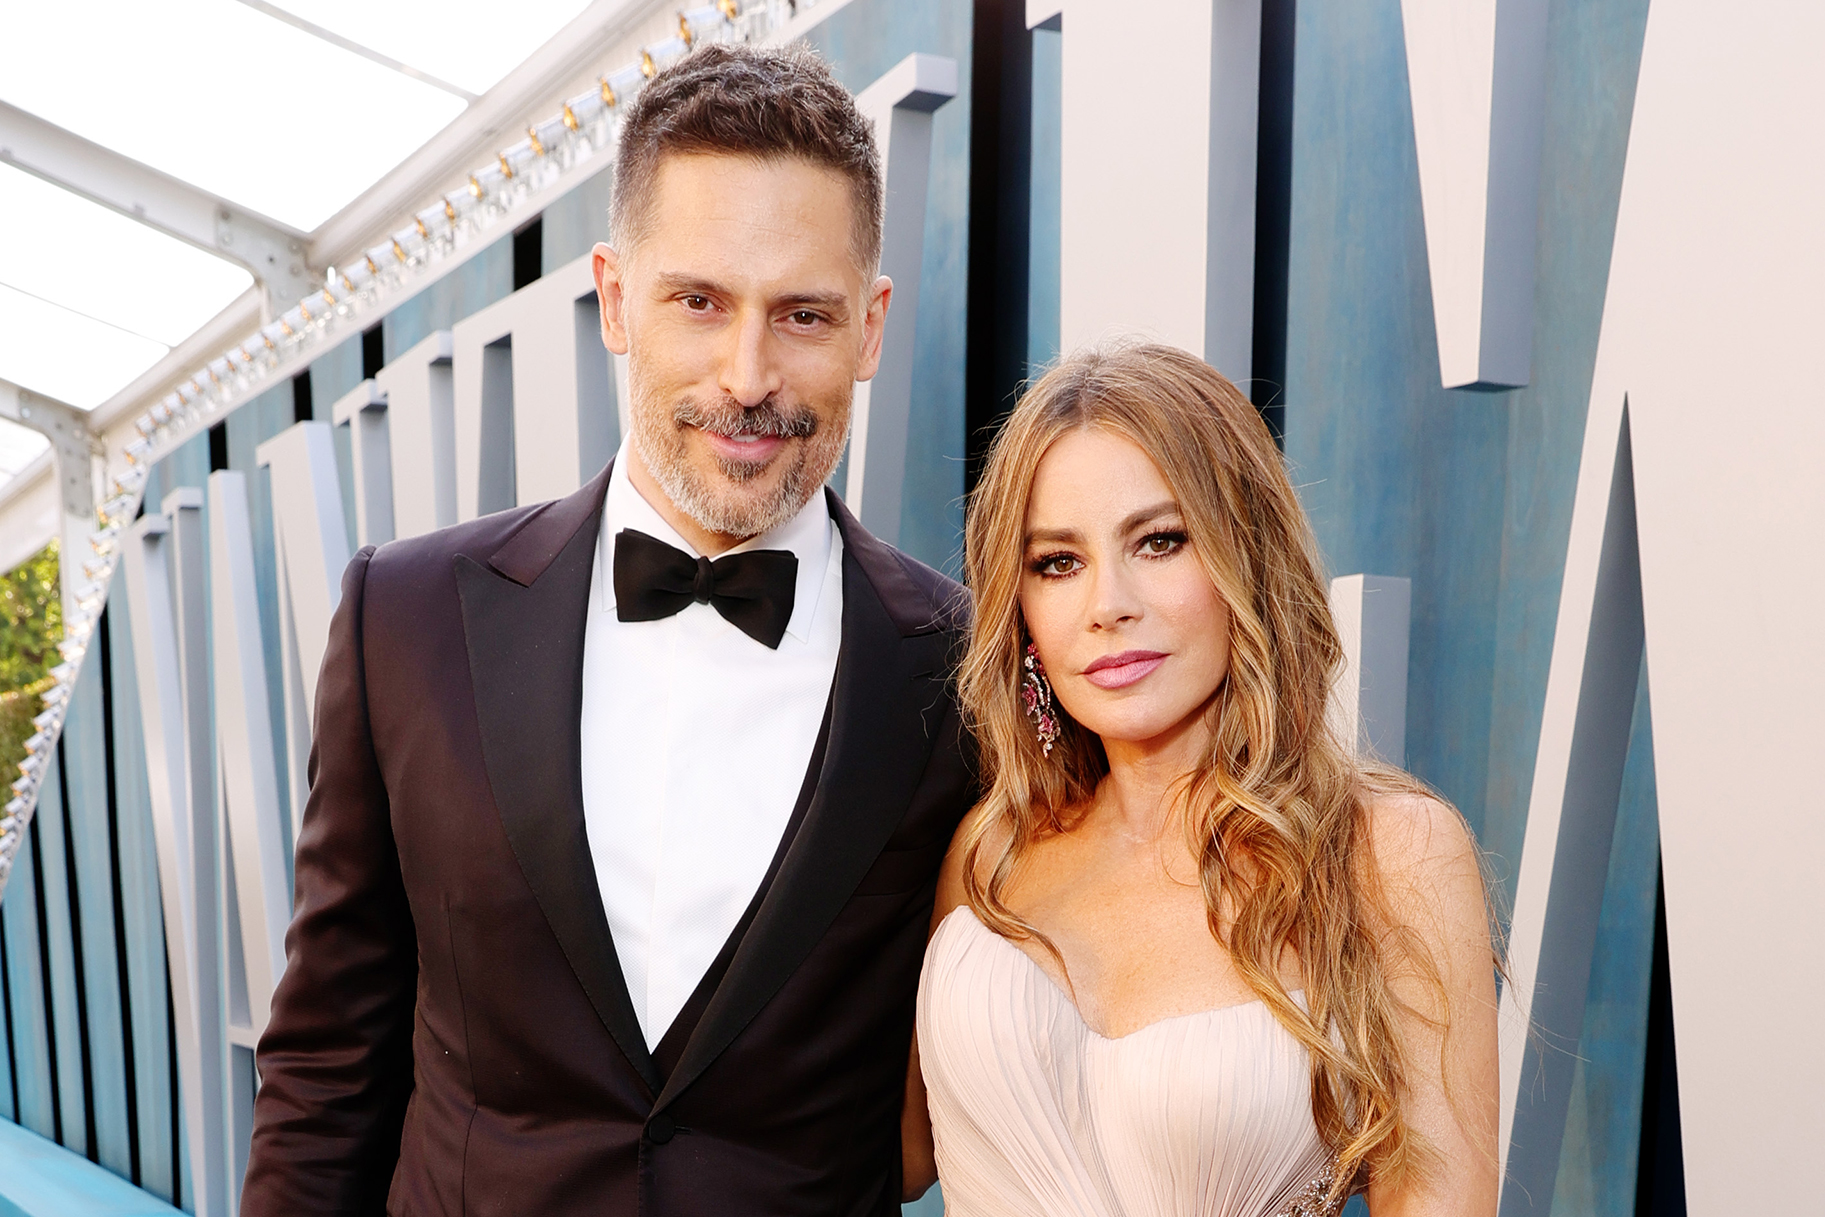 Sofia Vergara Says She's Gone Through a Lot of Changes Since Separating  From Joe Manganiello